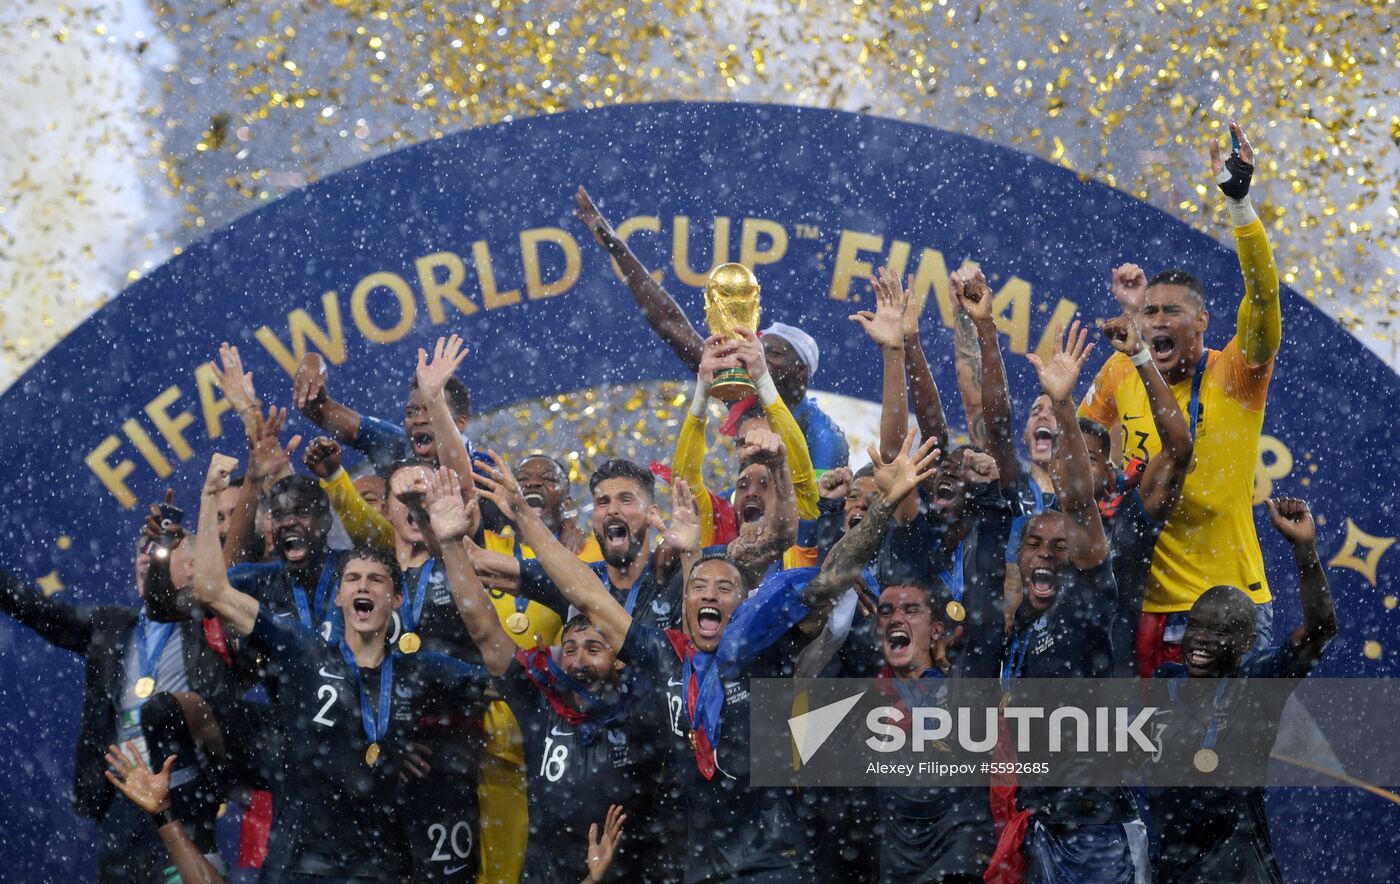  Russia World Cup Trophy